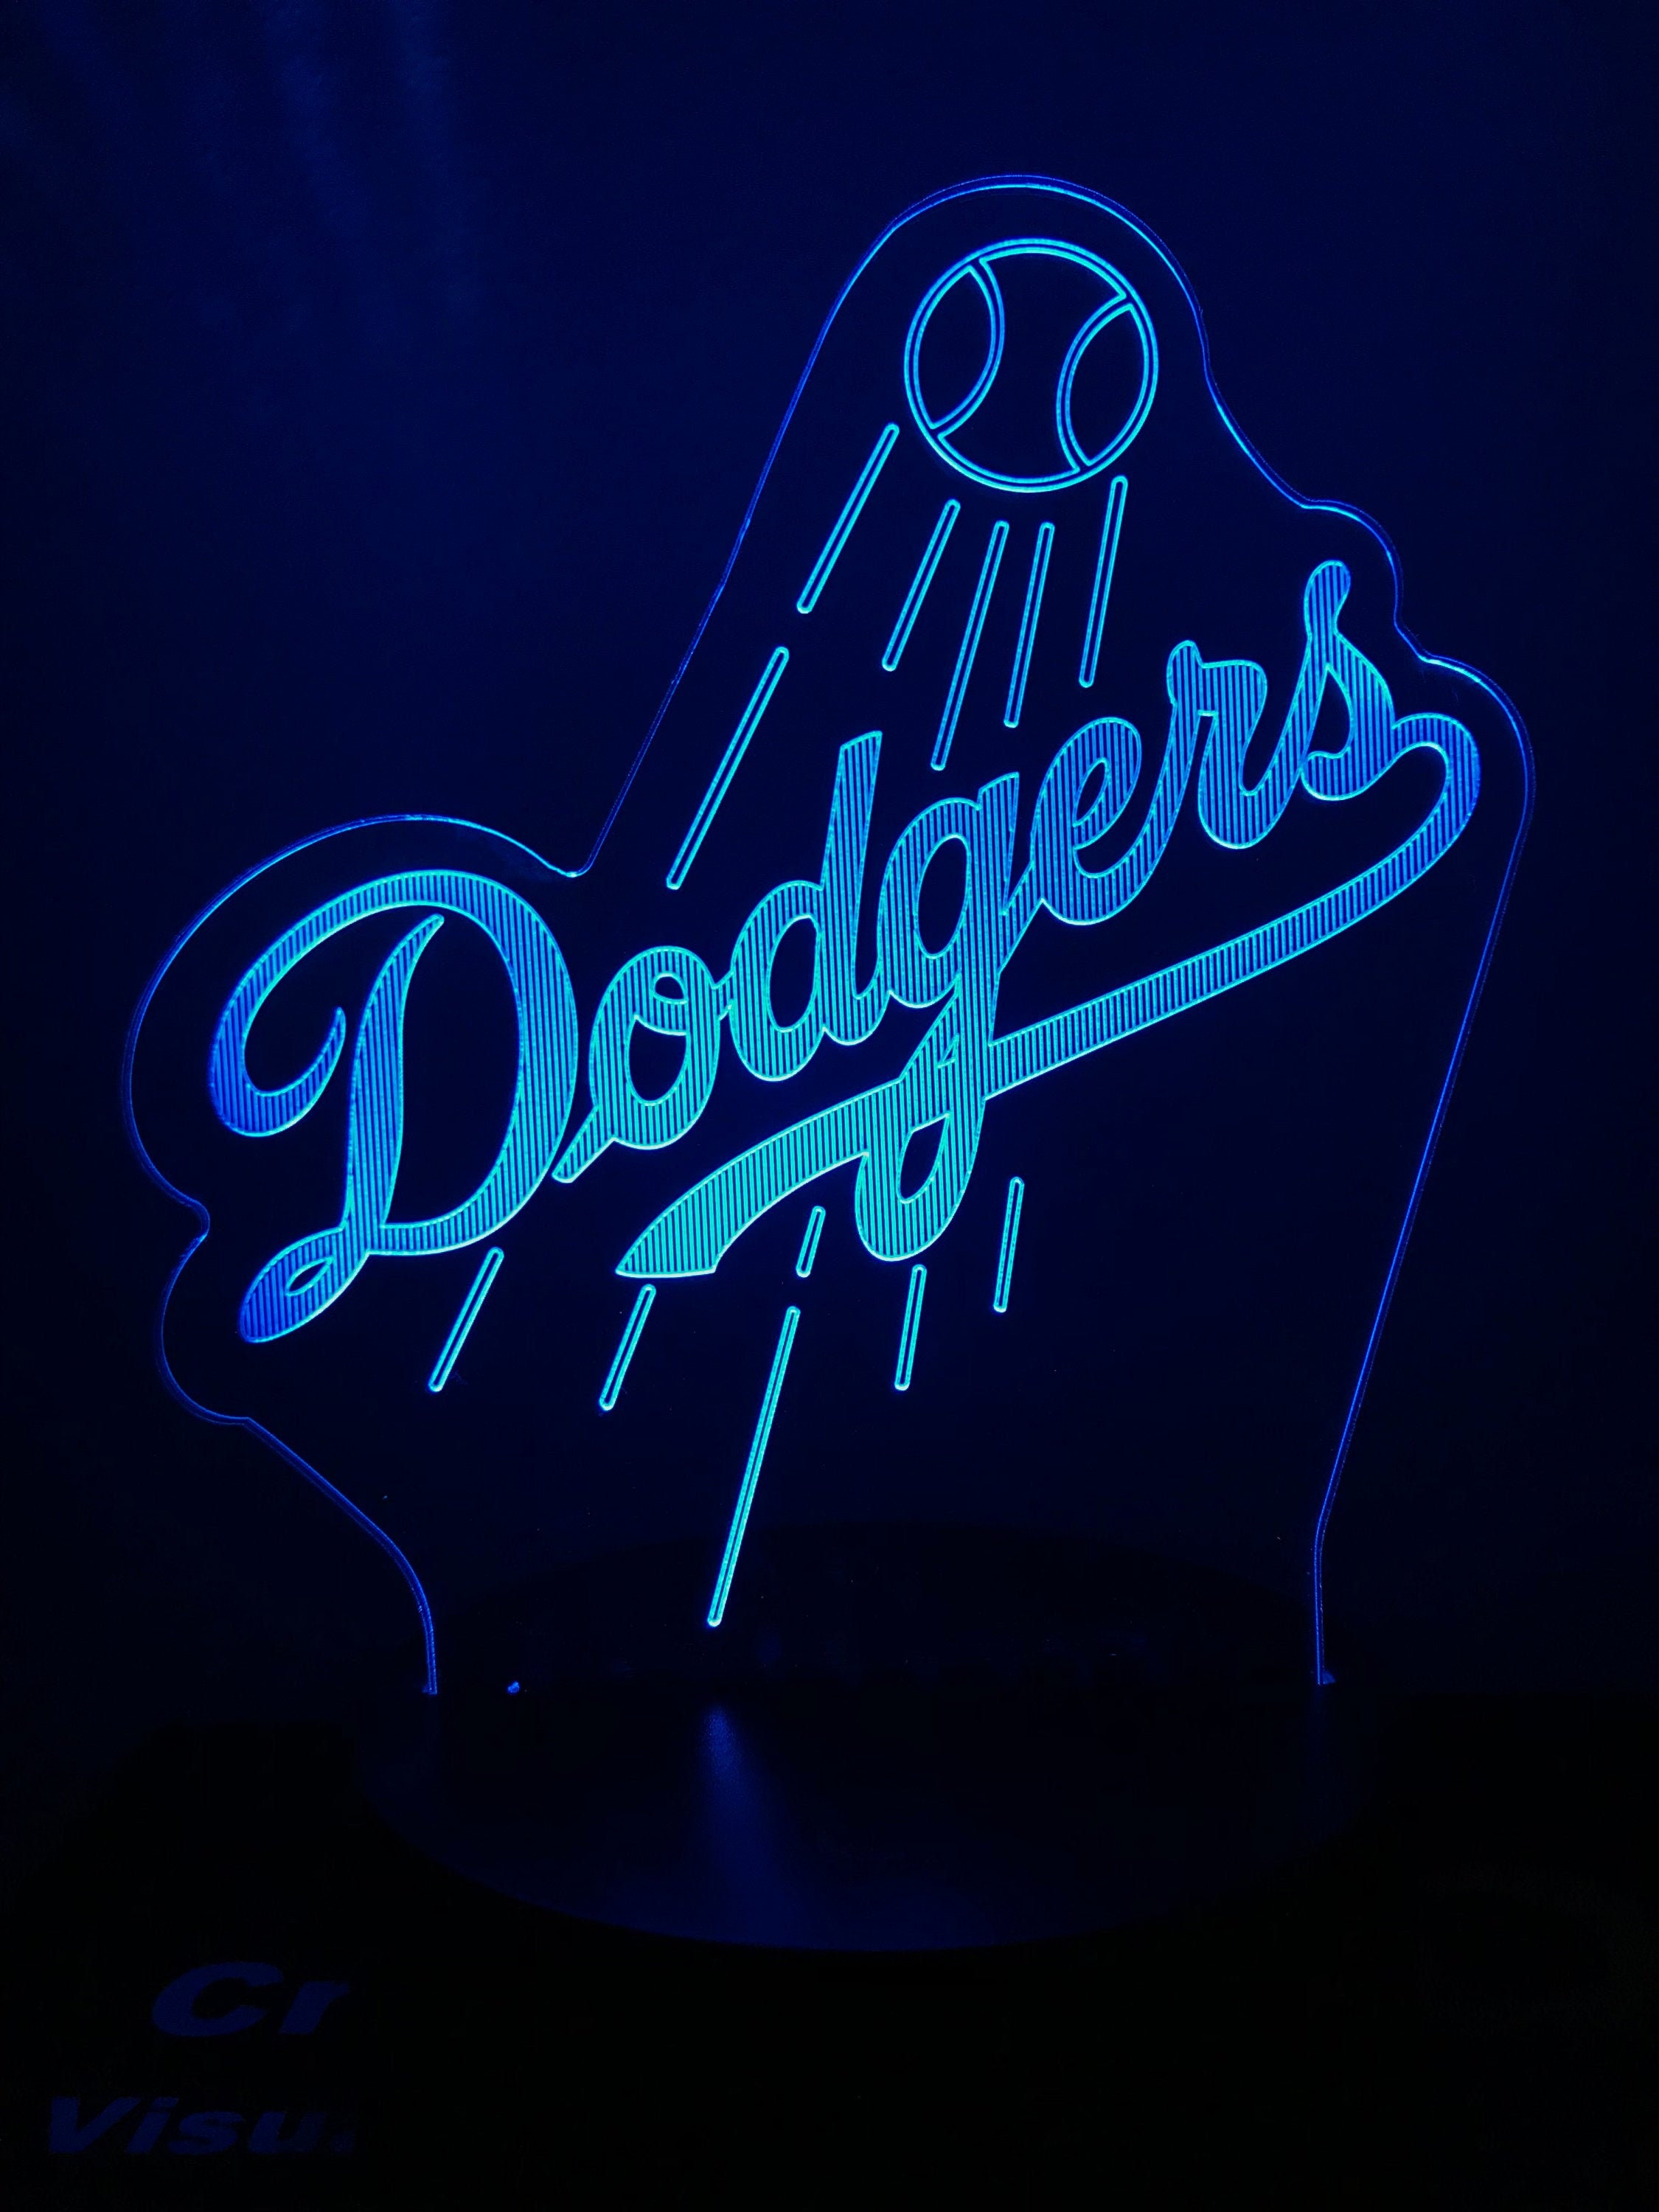 Queen Sense 26x12 For Los Angeles's Sports Team Dodgers Neon Sign Man  Cave Handmade Neon Light 126LADS 